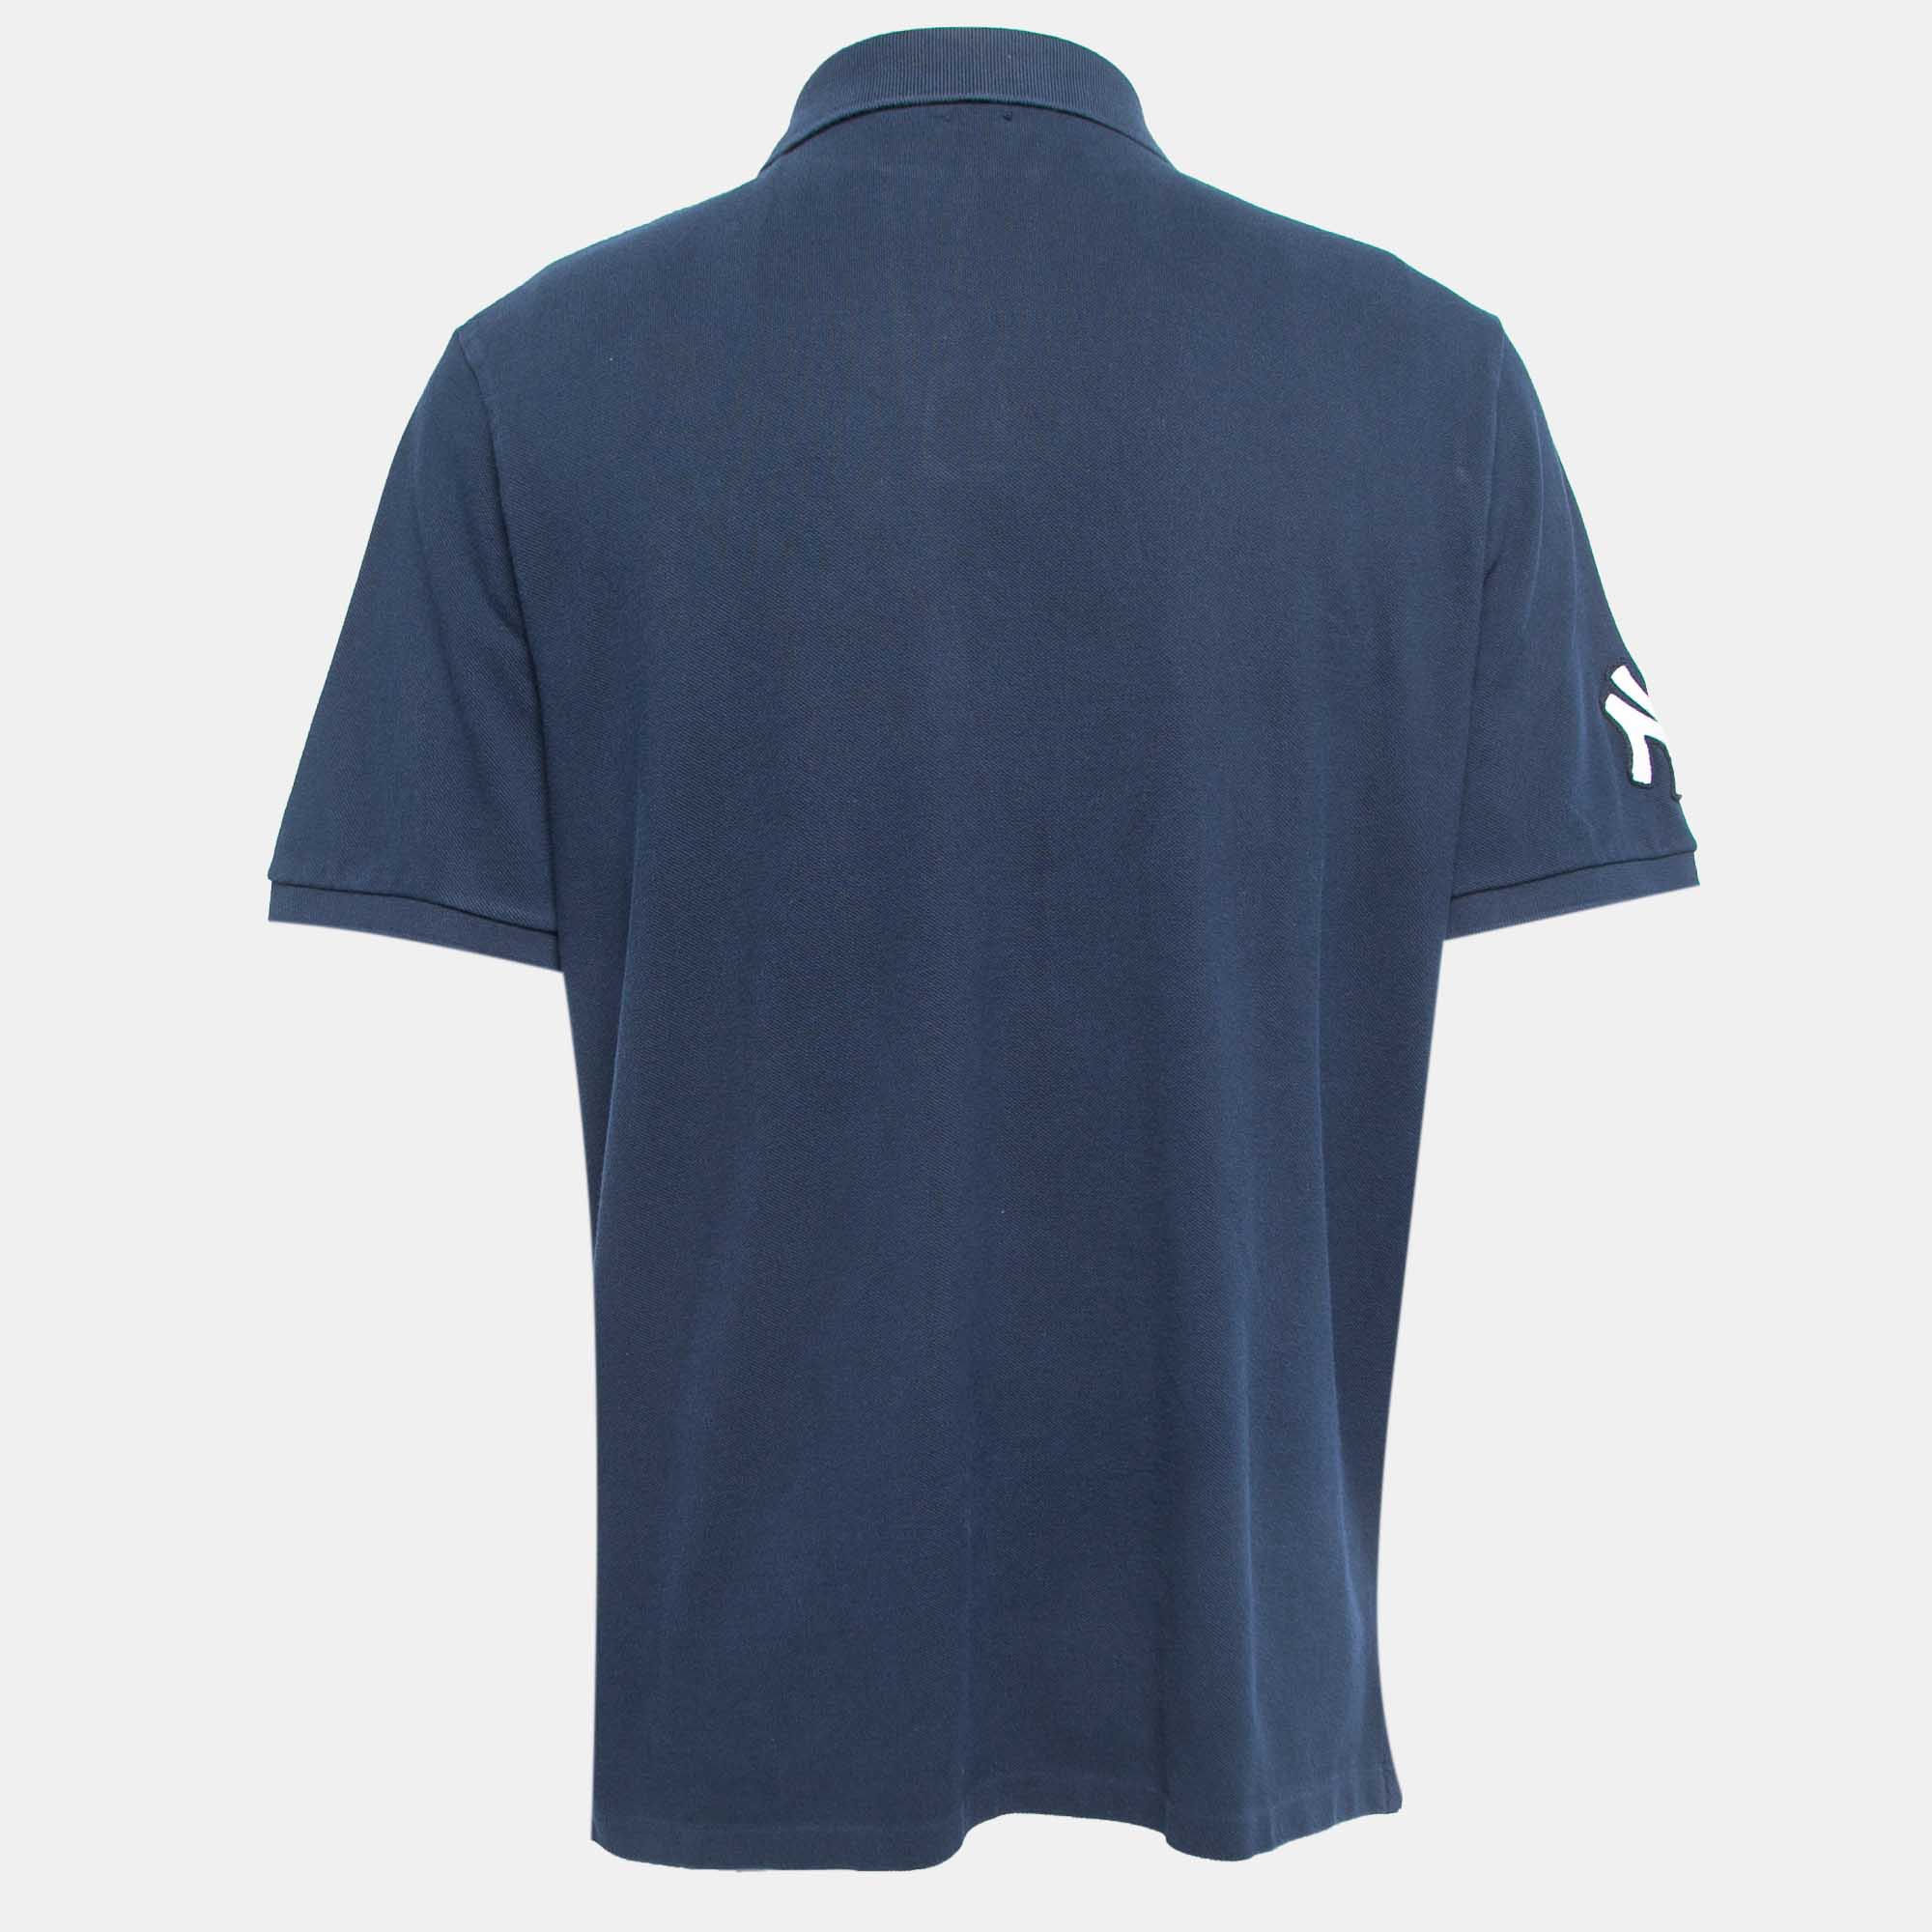 Polo Ralph Lauren Navy Blue Logo Embroidered Cotton Polo T-Shirt L